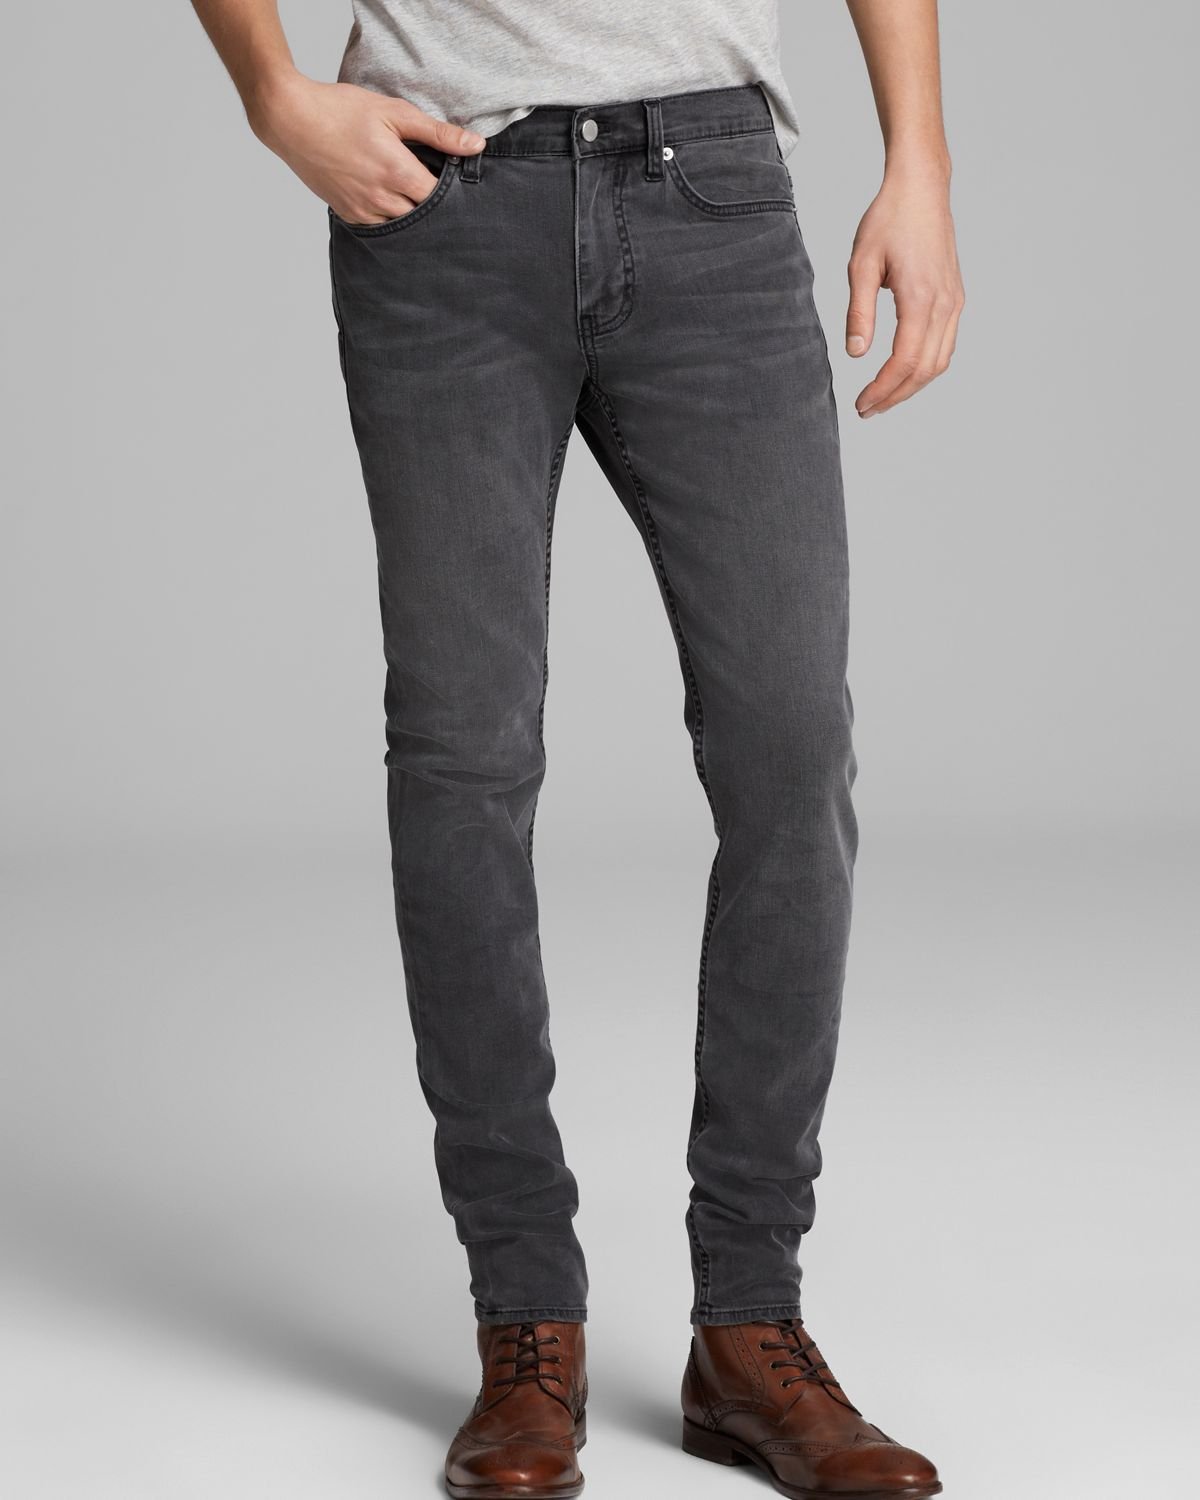 Blk dnm Jeans Slim Fit in Classic Wash Grey in Gray for Men | Lyst